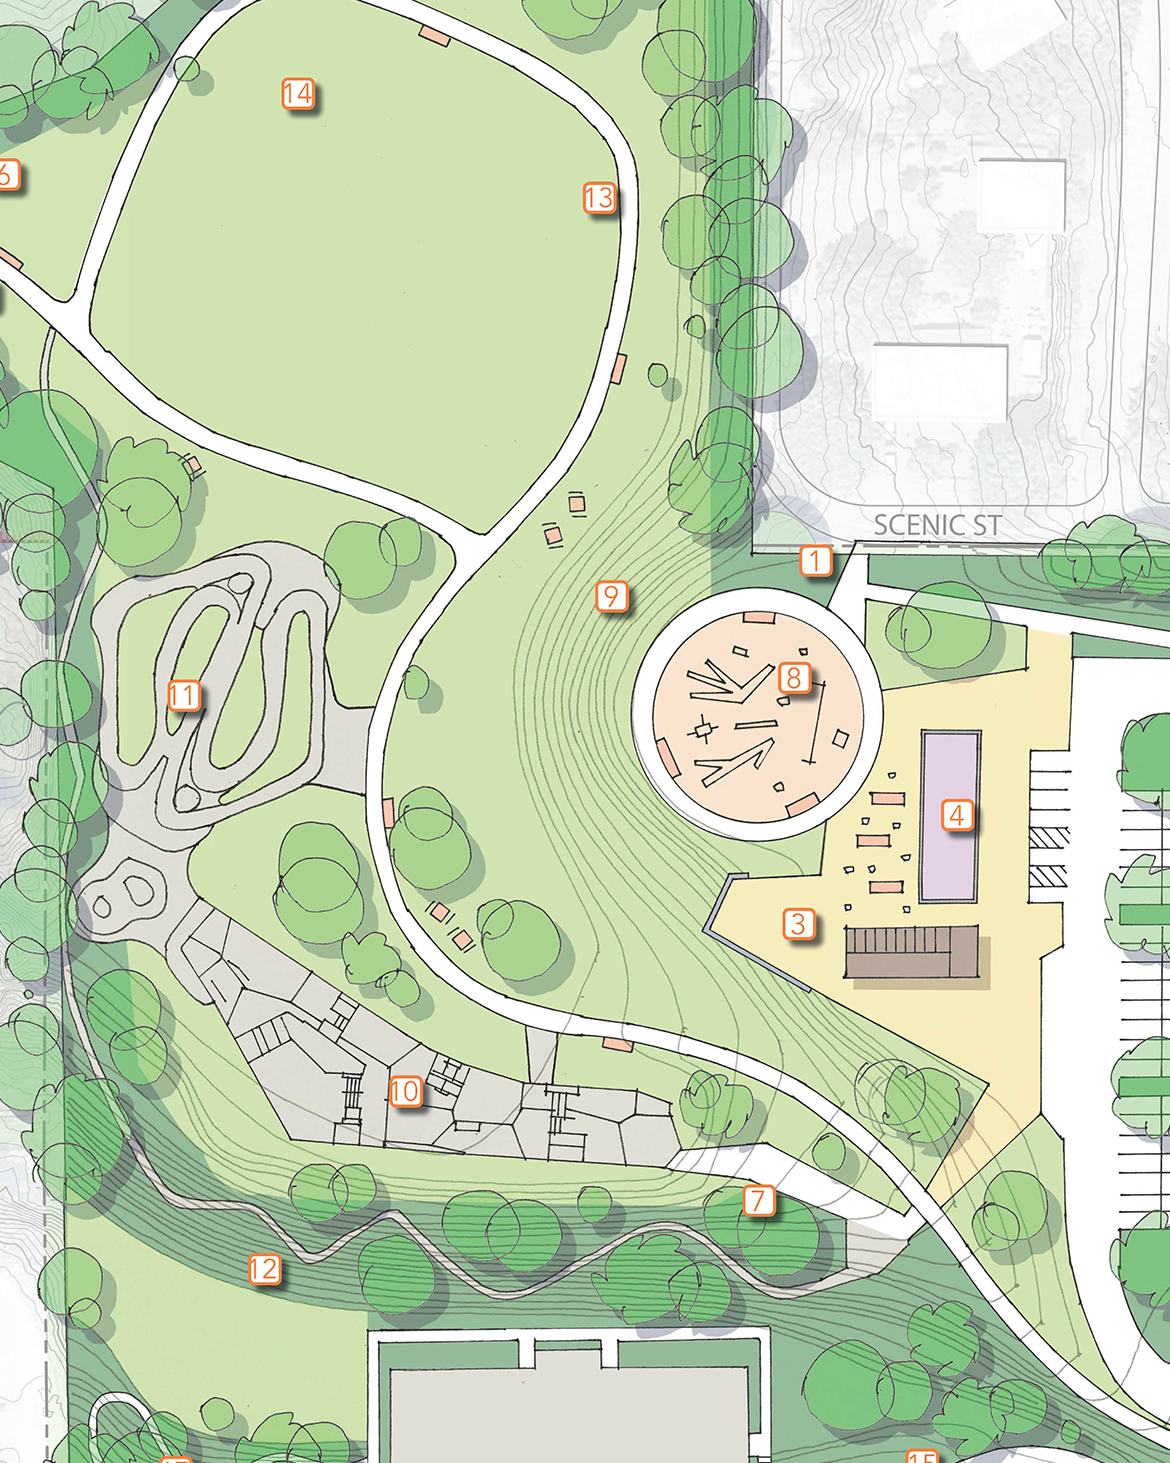 zoom in of Plateau's playground design